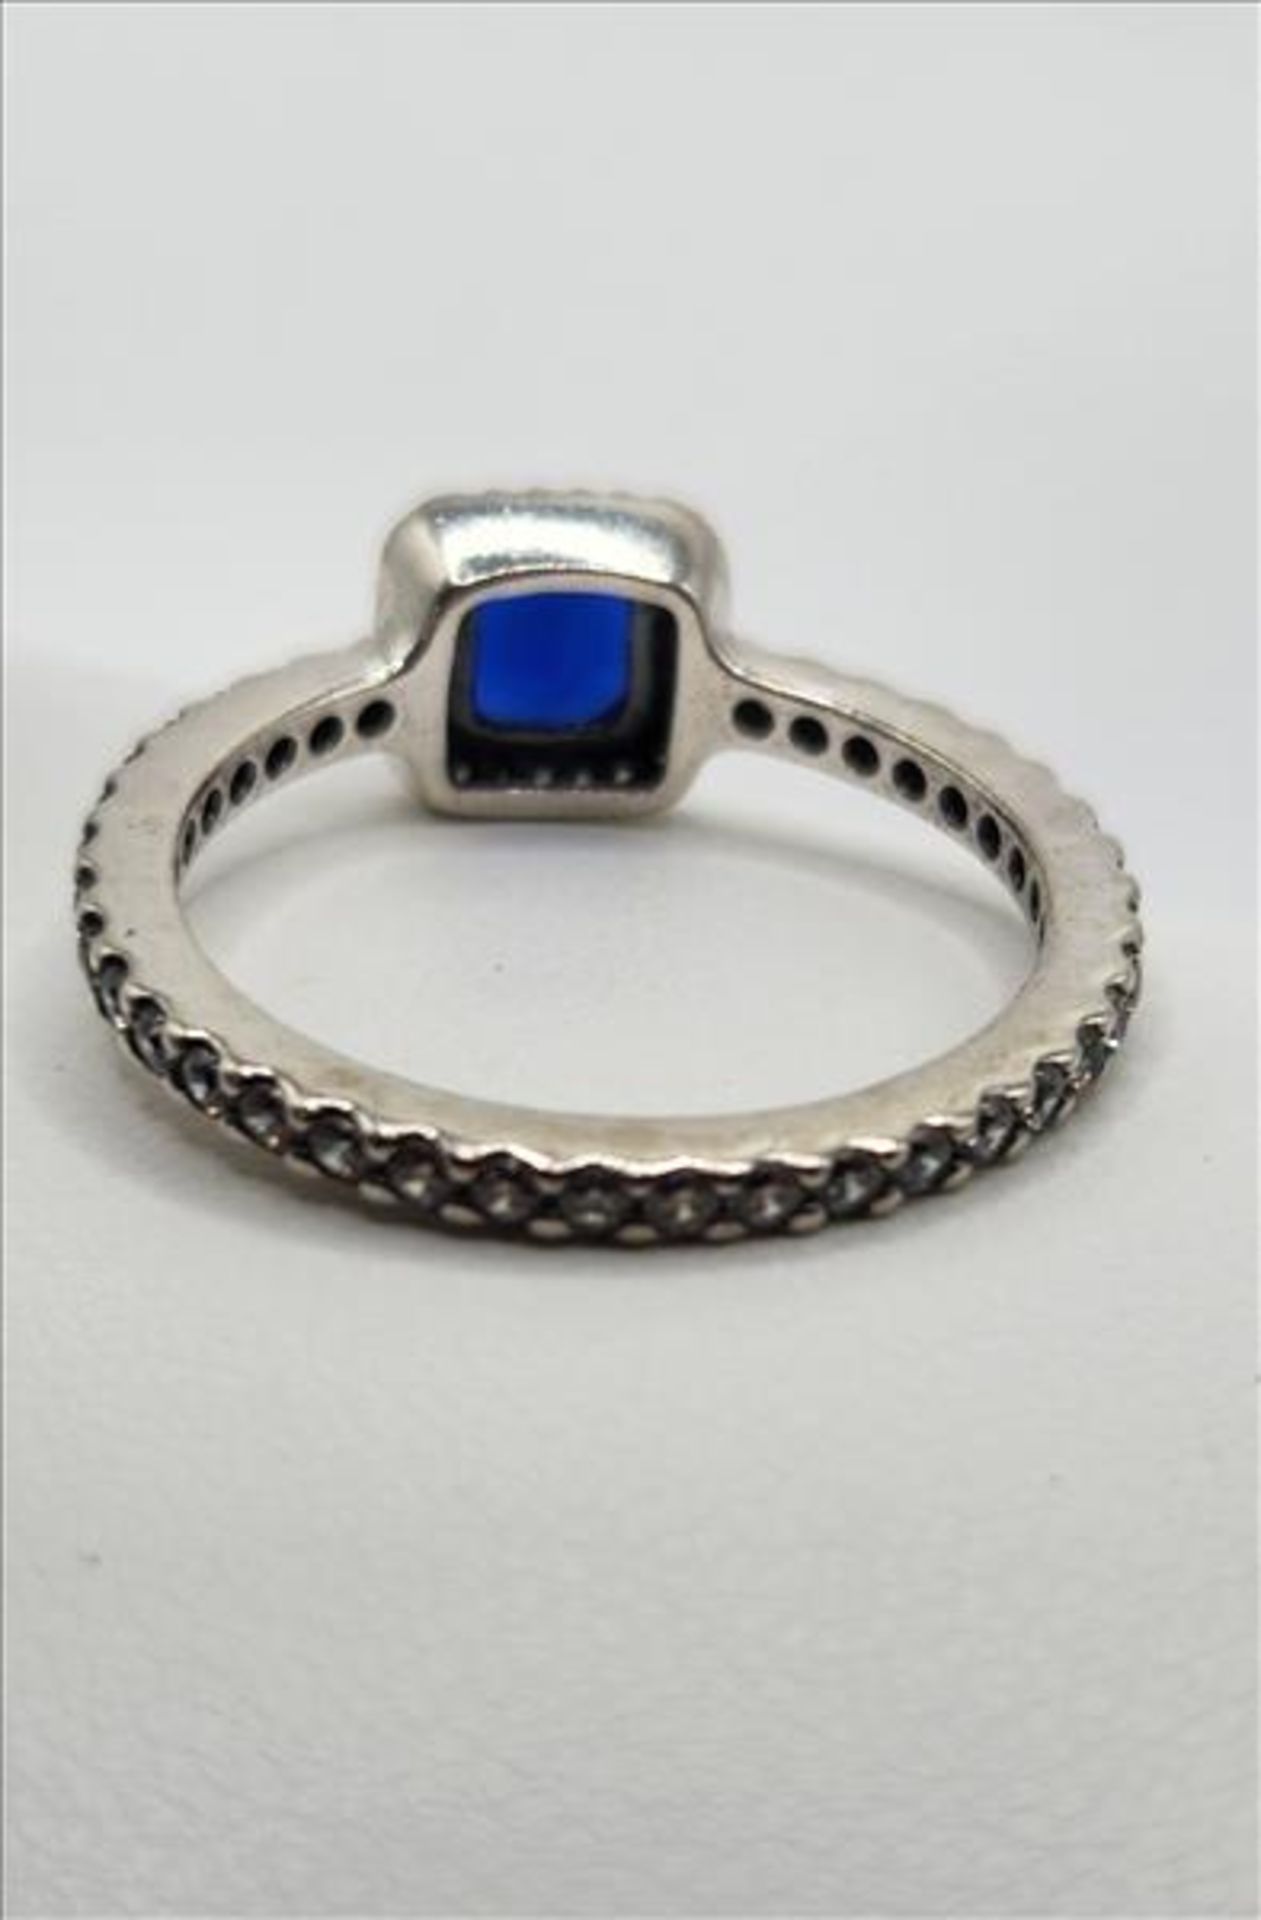 Pandora blue stone sterling silver ring - Image 4 of 4